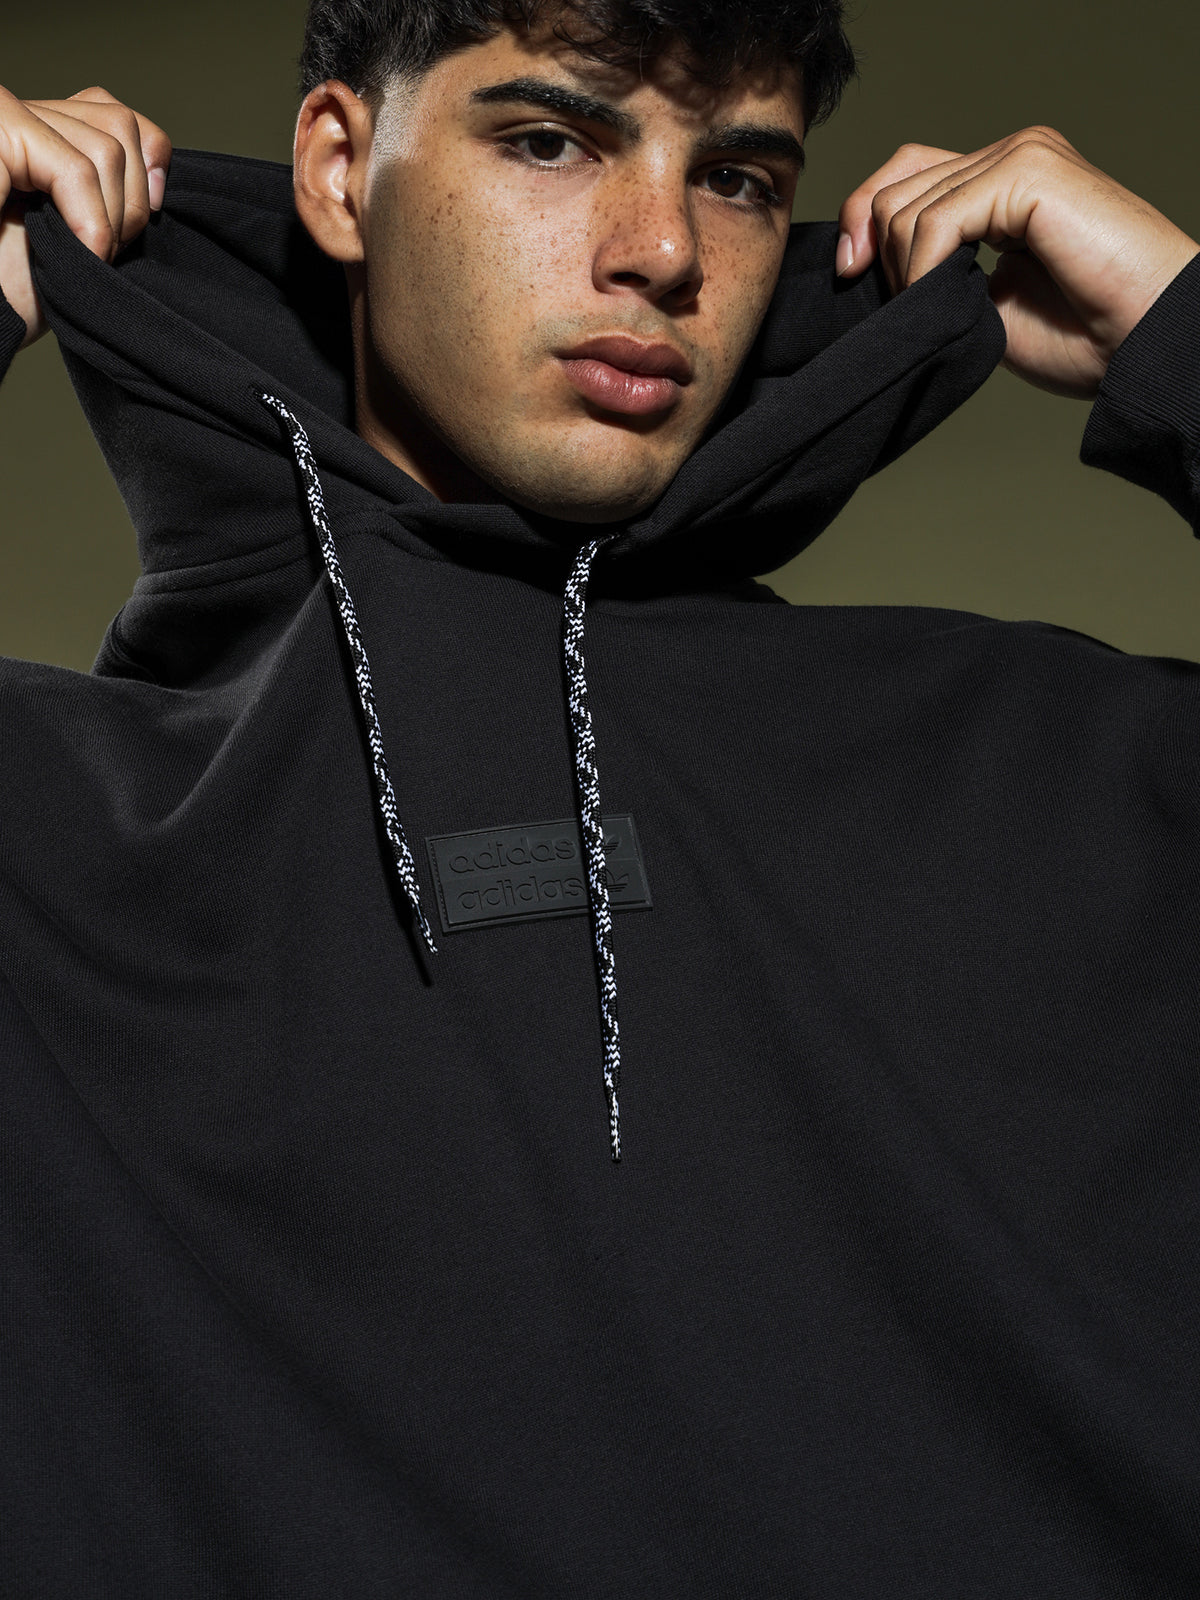 Silicone Hoodie in Black